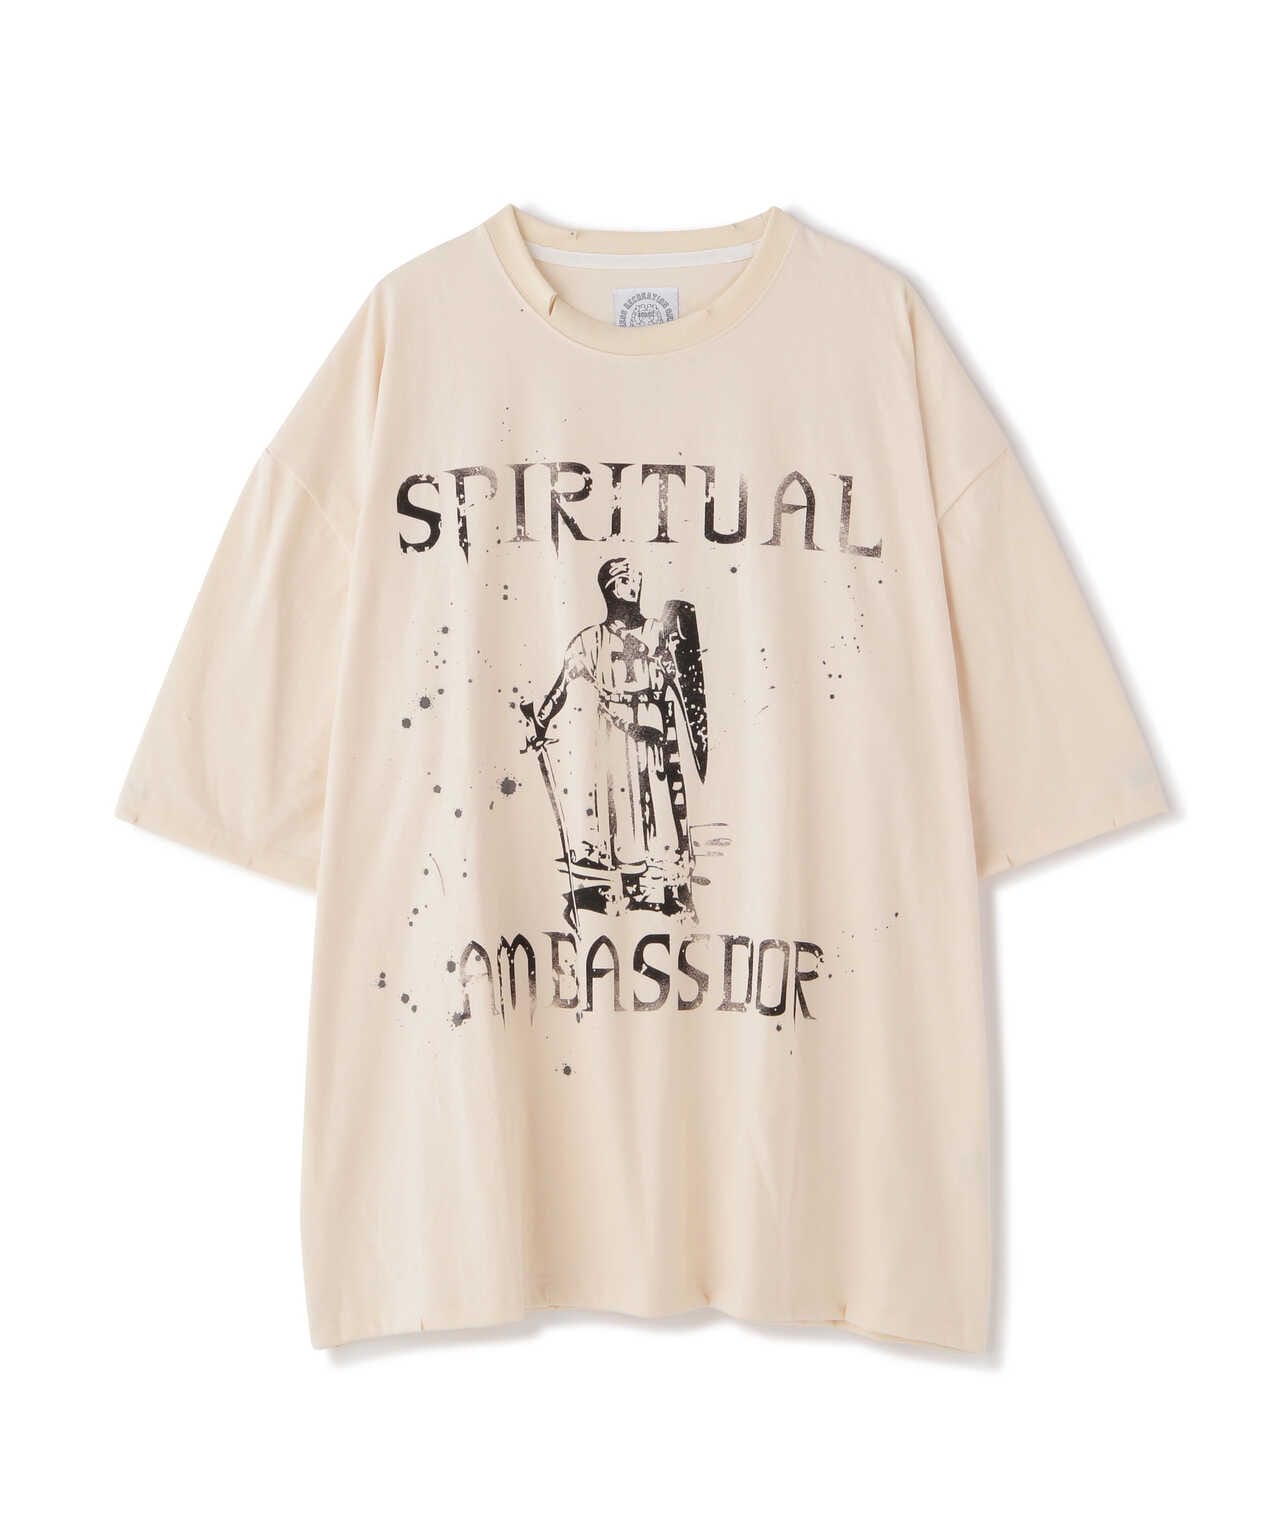 SOMEIT/サミット/S.A.S VINTAGE TEE/ヴィンテージTシャツ | LHP